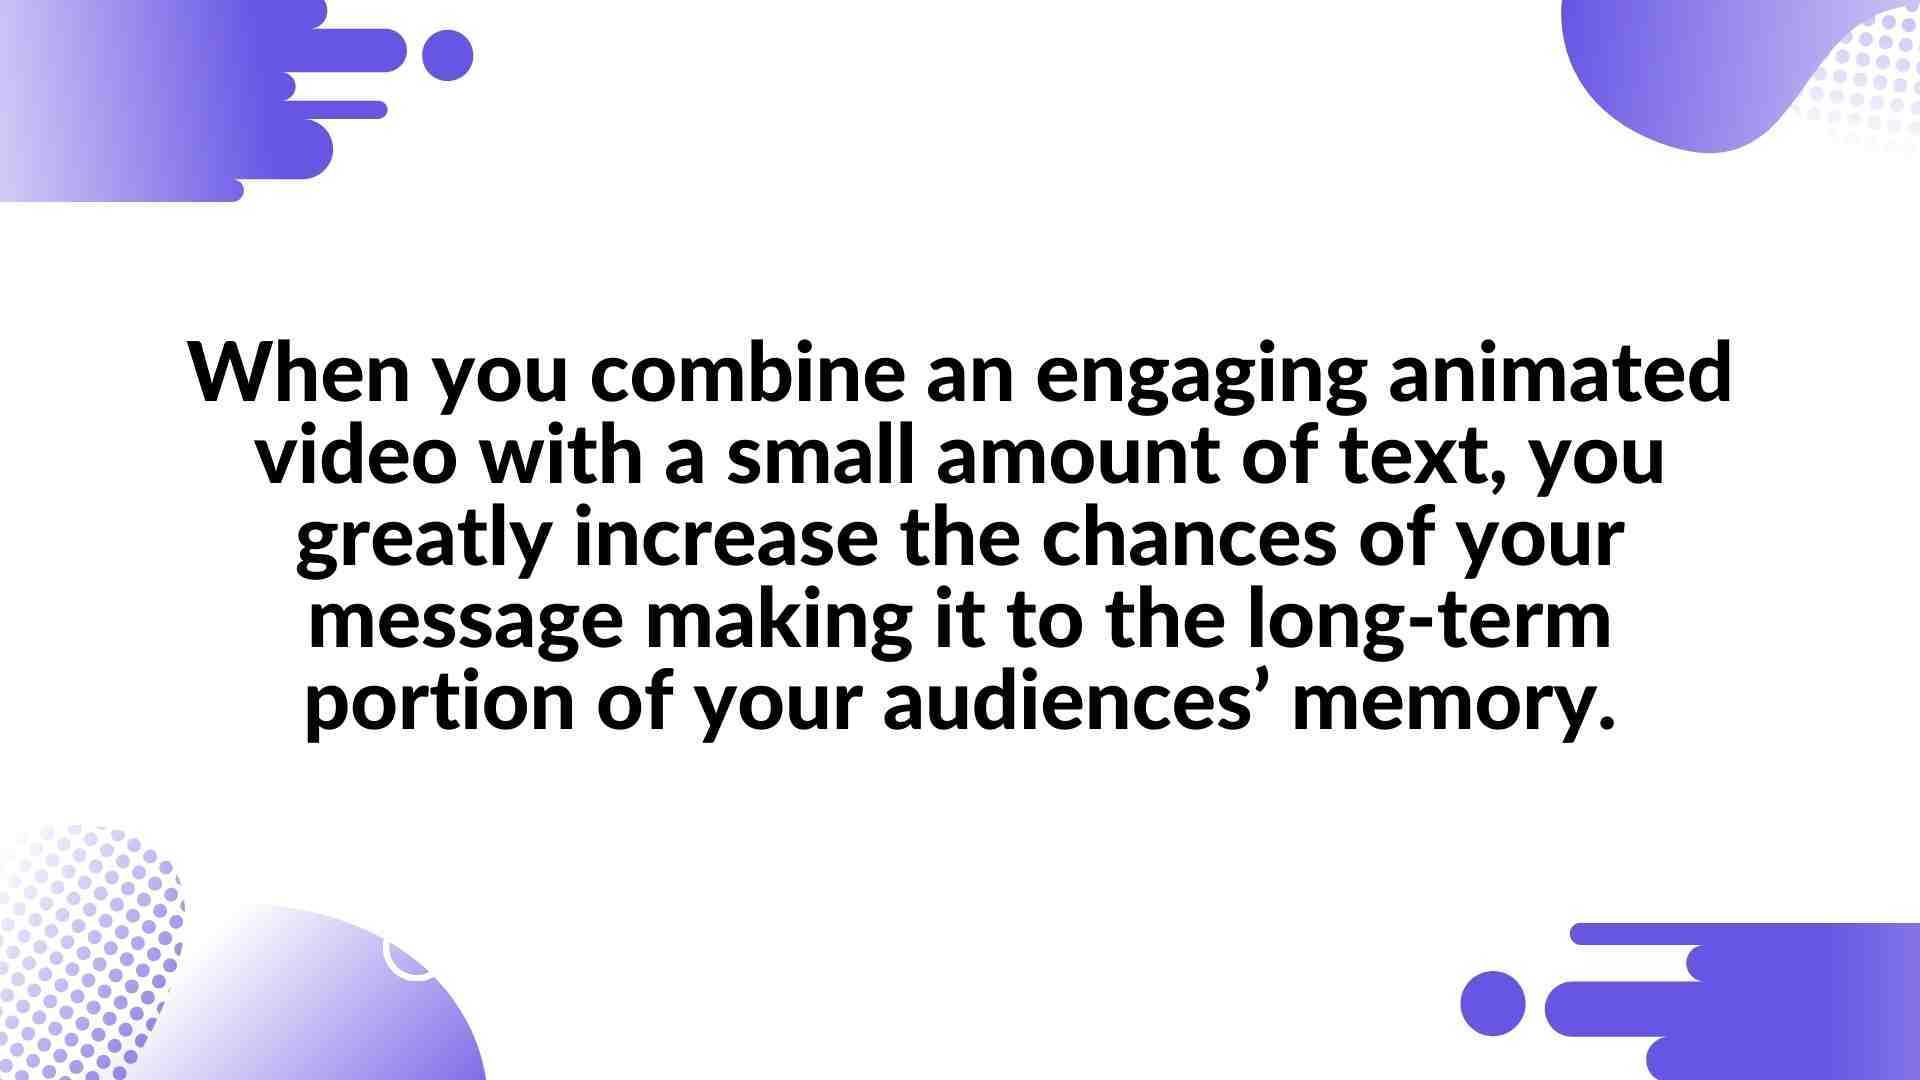 When you combine an engaging animated video with a small amount of text, you greatly increase the chances of your message making it to the long-term portion of your audiences’ memory. - Animated Video in Presentations